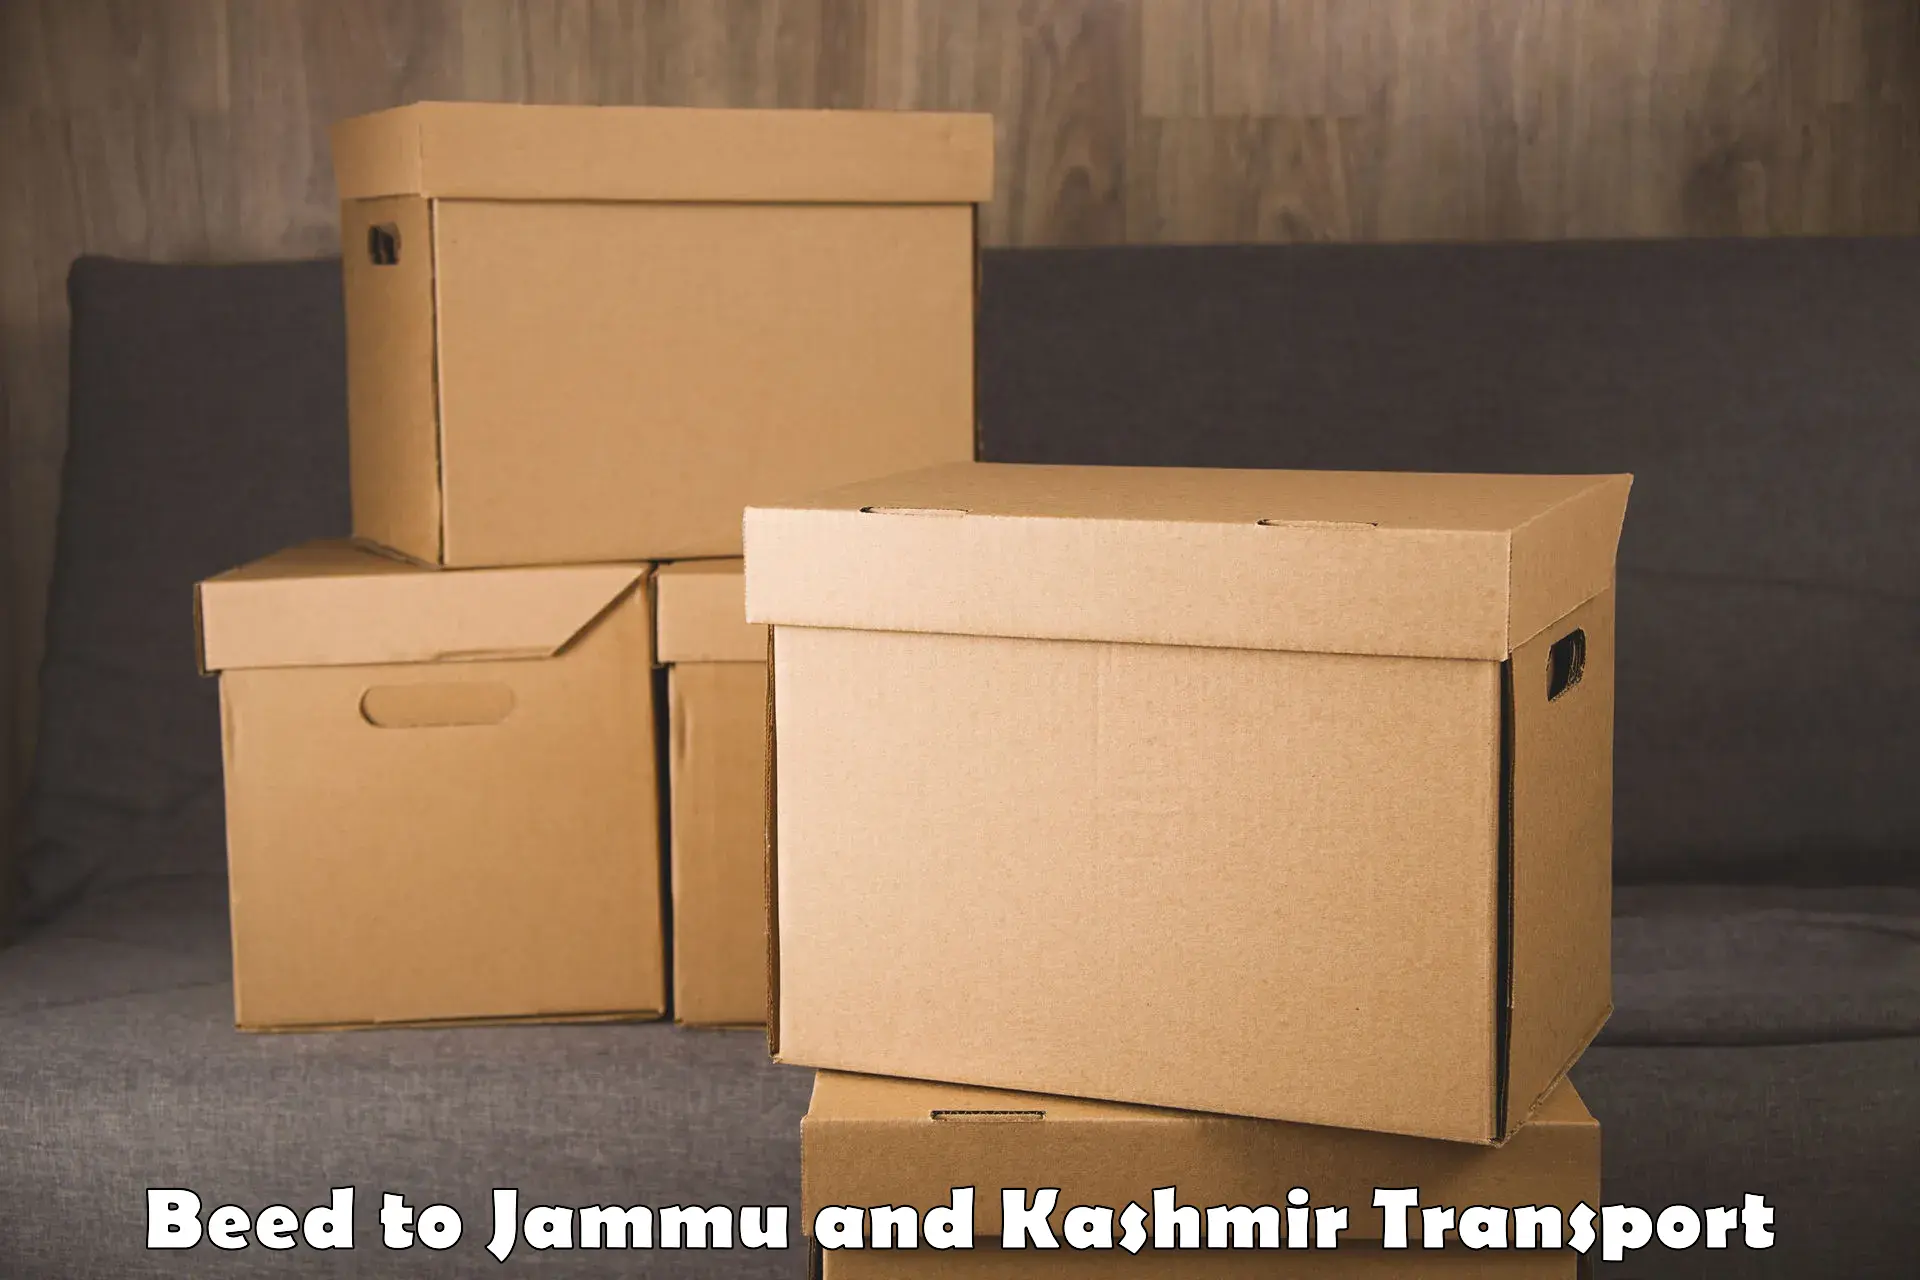 Transport shared services Beed to Baramulla